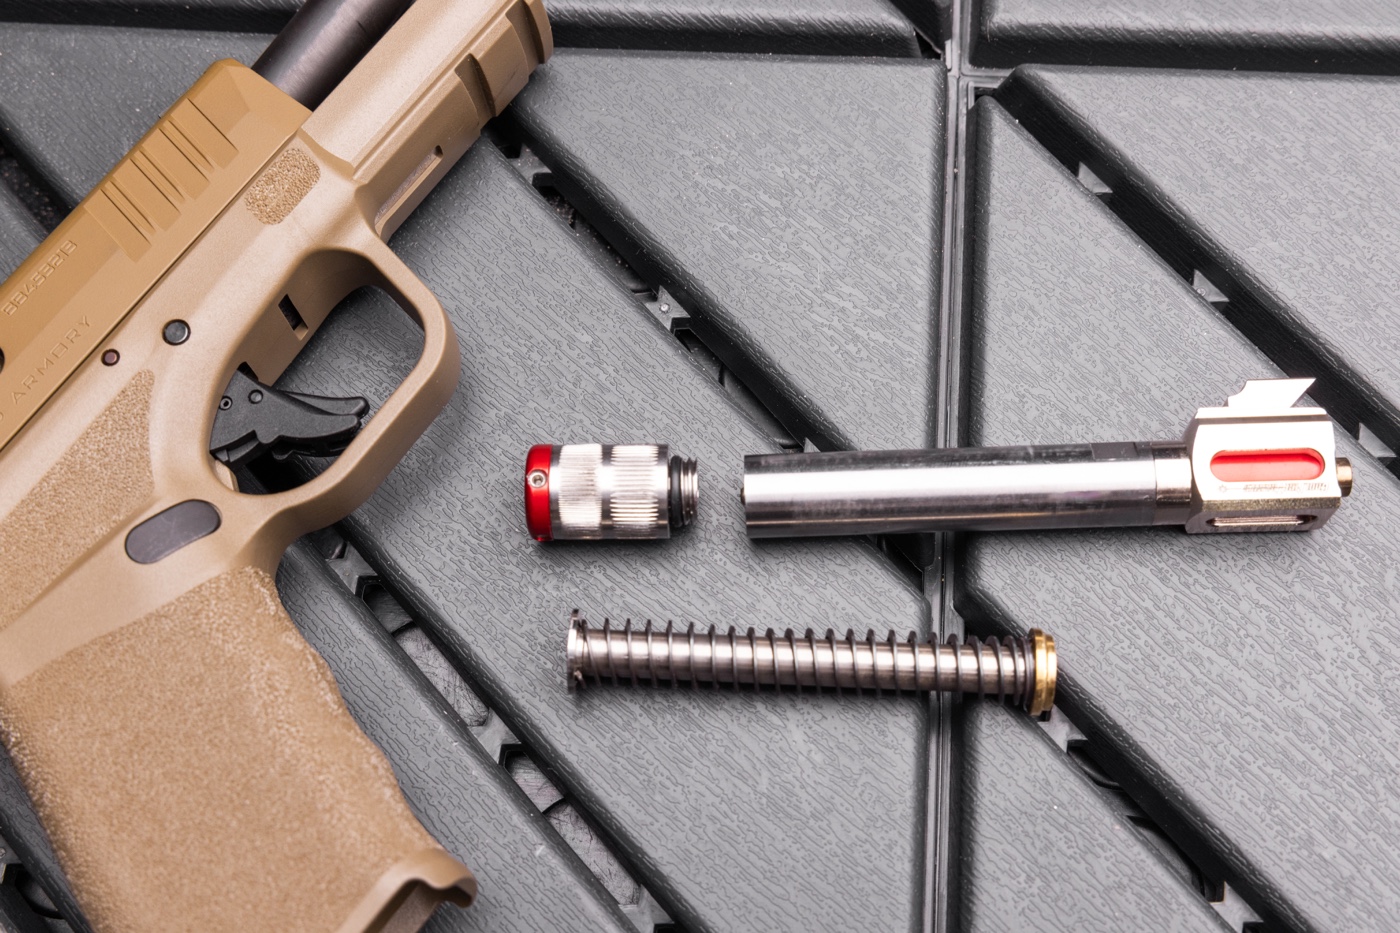 barrel and recoil spring for coolfire dry fire training system